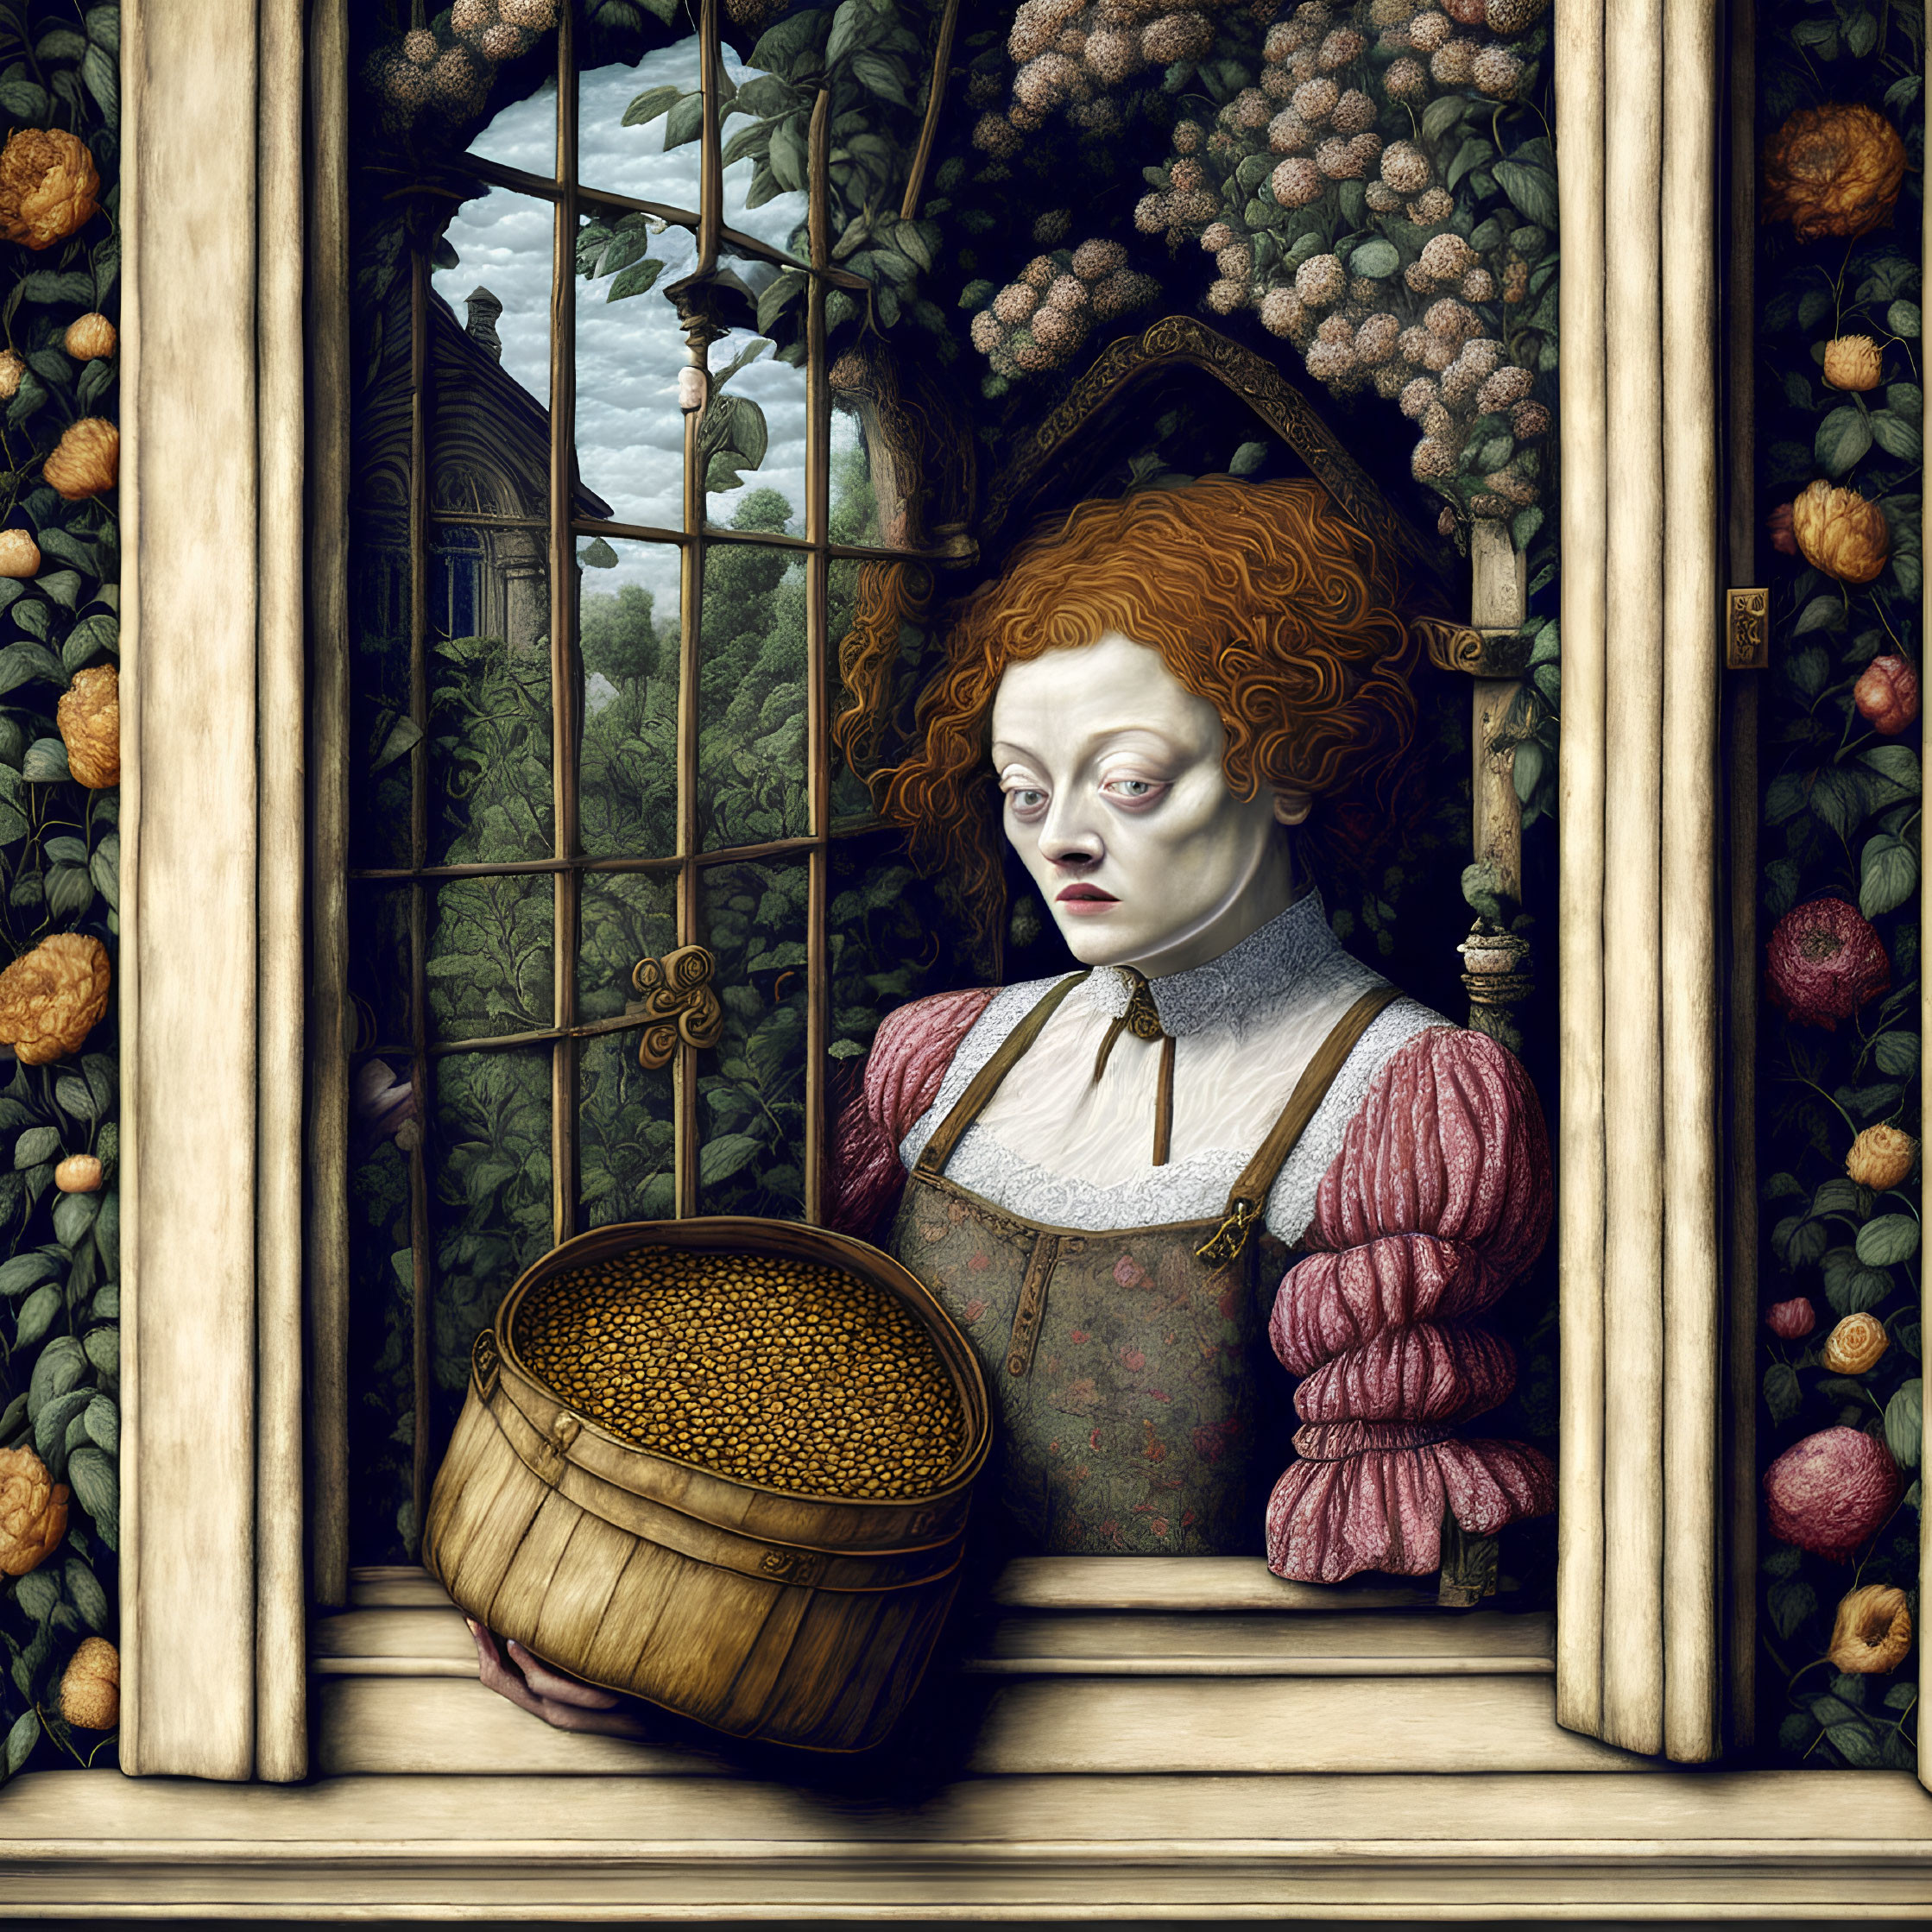 Red-haired woman holding golden orbs by lush window foliage.